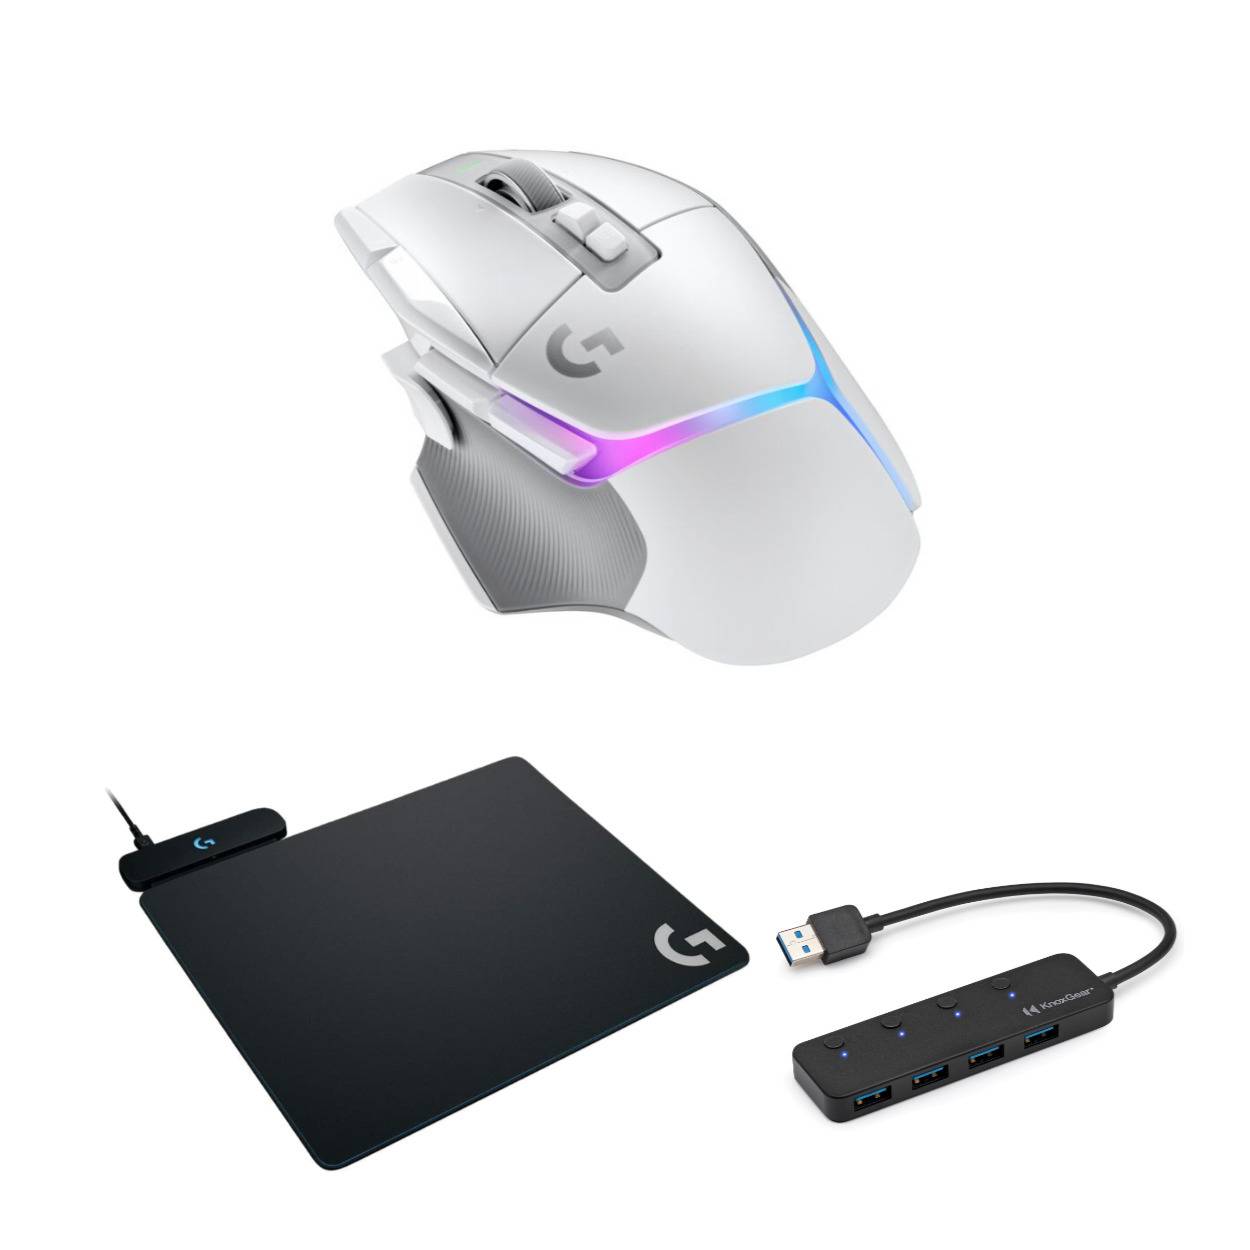 Logitech G502 X Plus Wireless Gaming Mouse (White) with Wireless Charging System and USB 3.0 Hub